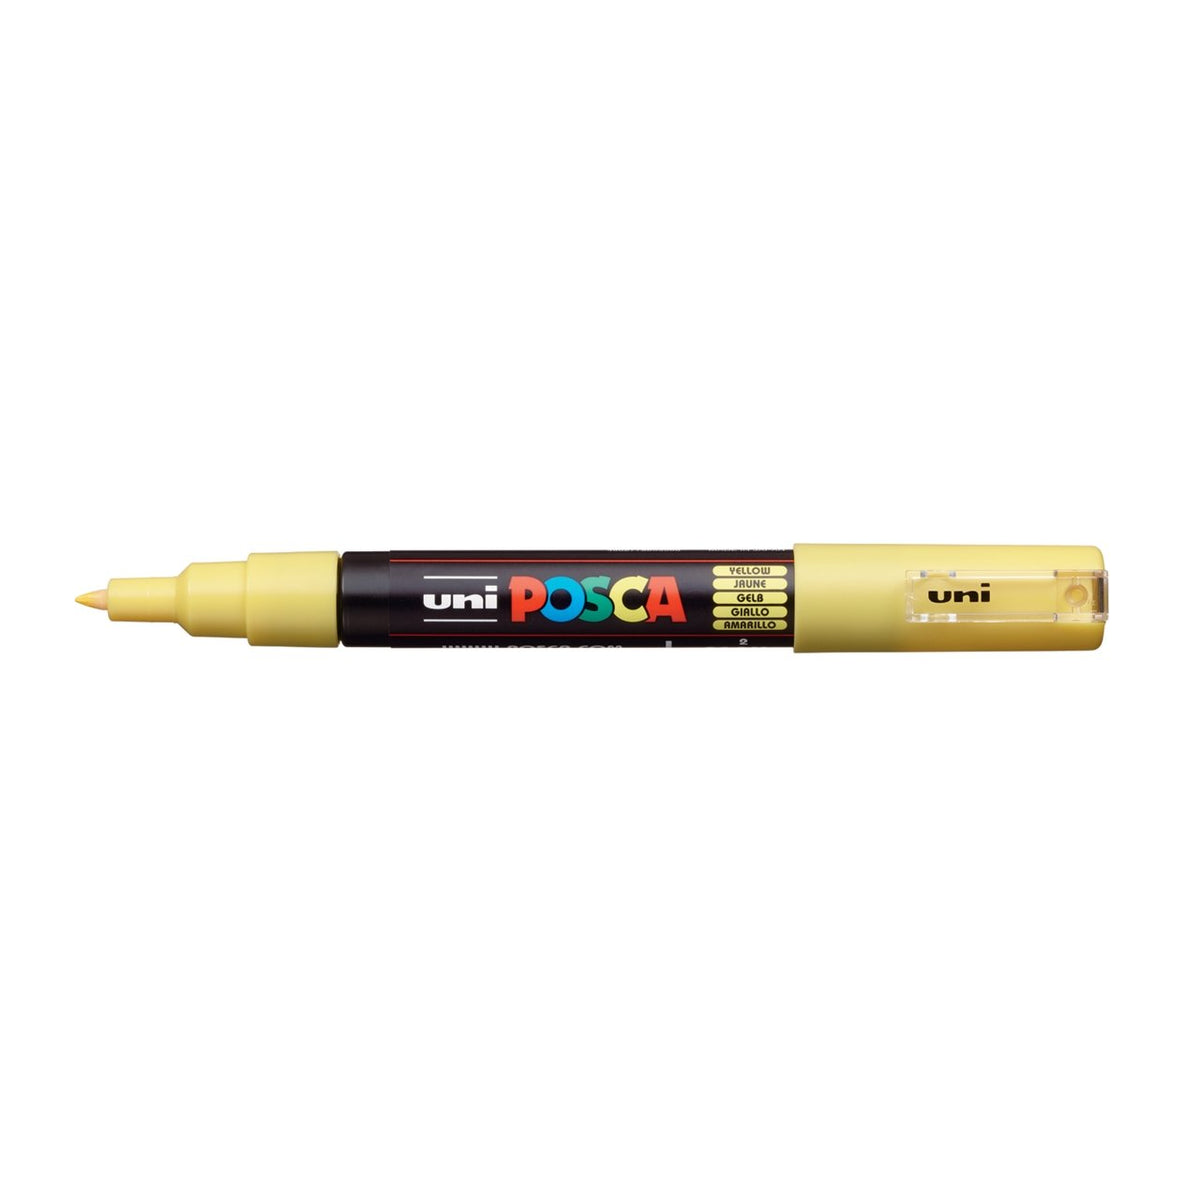 https://cdn.shopify.com/s/files/1/0006/8947/1551/products/uni-posca-paint-marker-pc-1m-extra-fine-tapered-bullet-tip-yellow-164903_1200x.jpg?v=1671502934